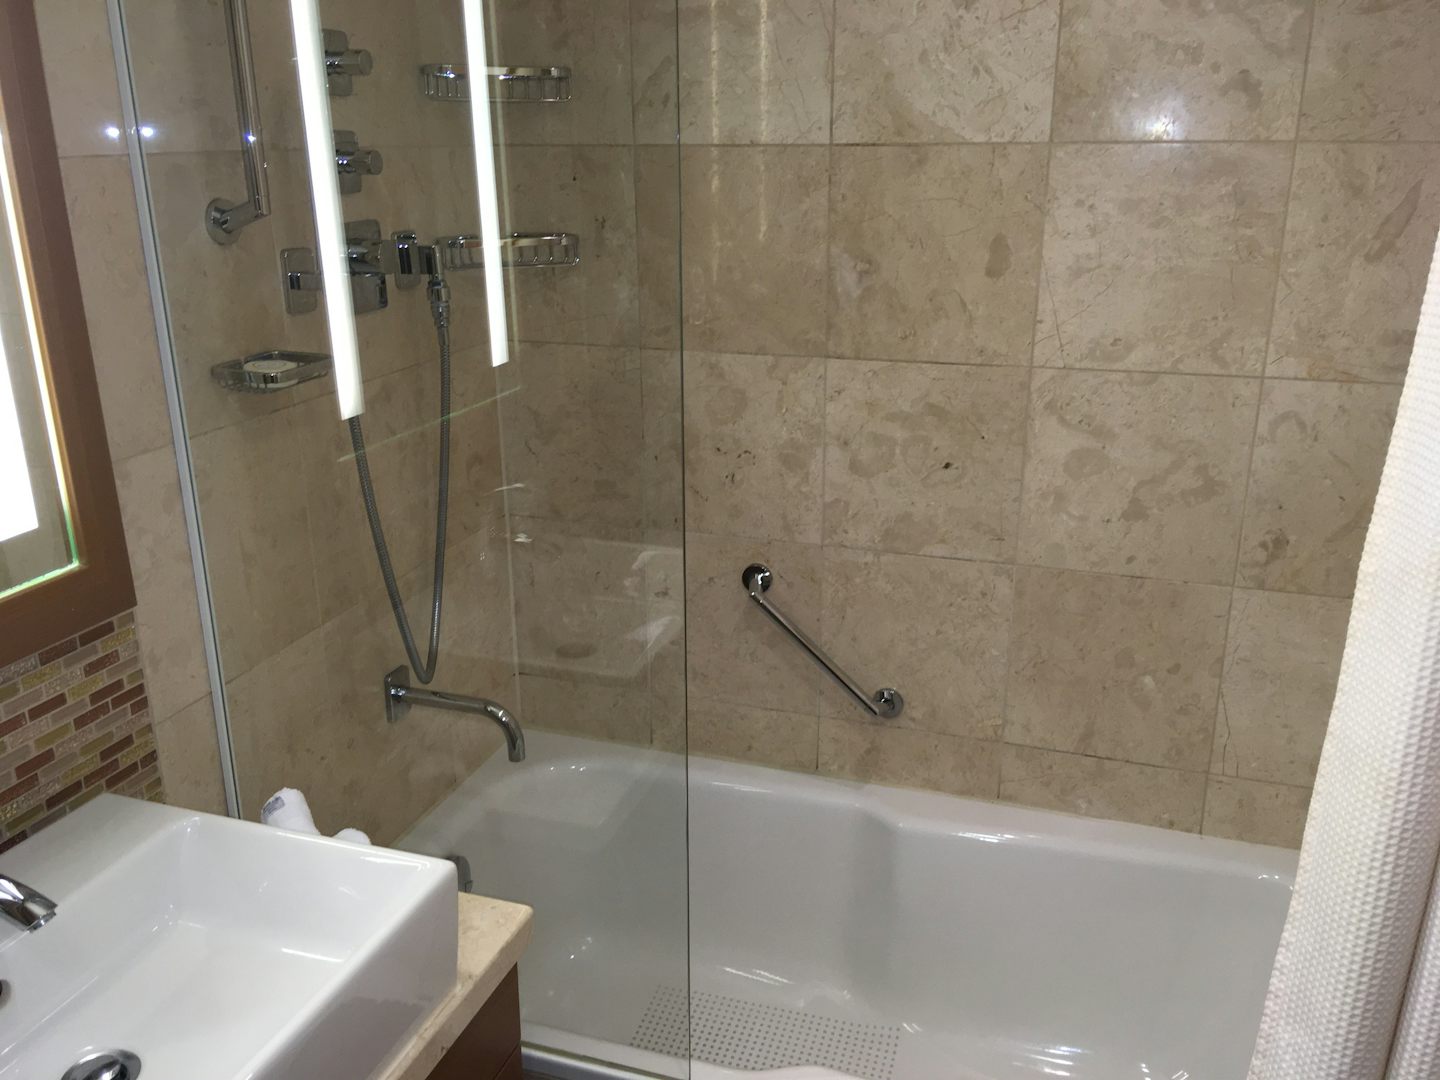 Bathroom with single sink and shower above bath. Very small as it has 2 doo